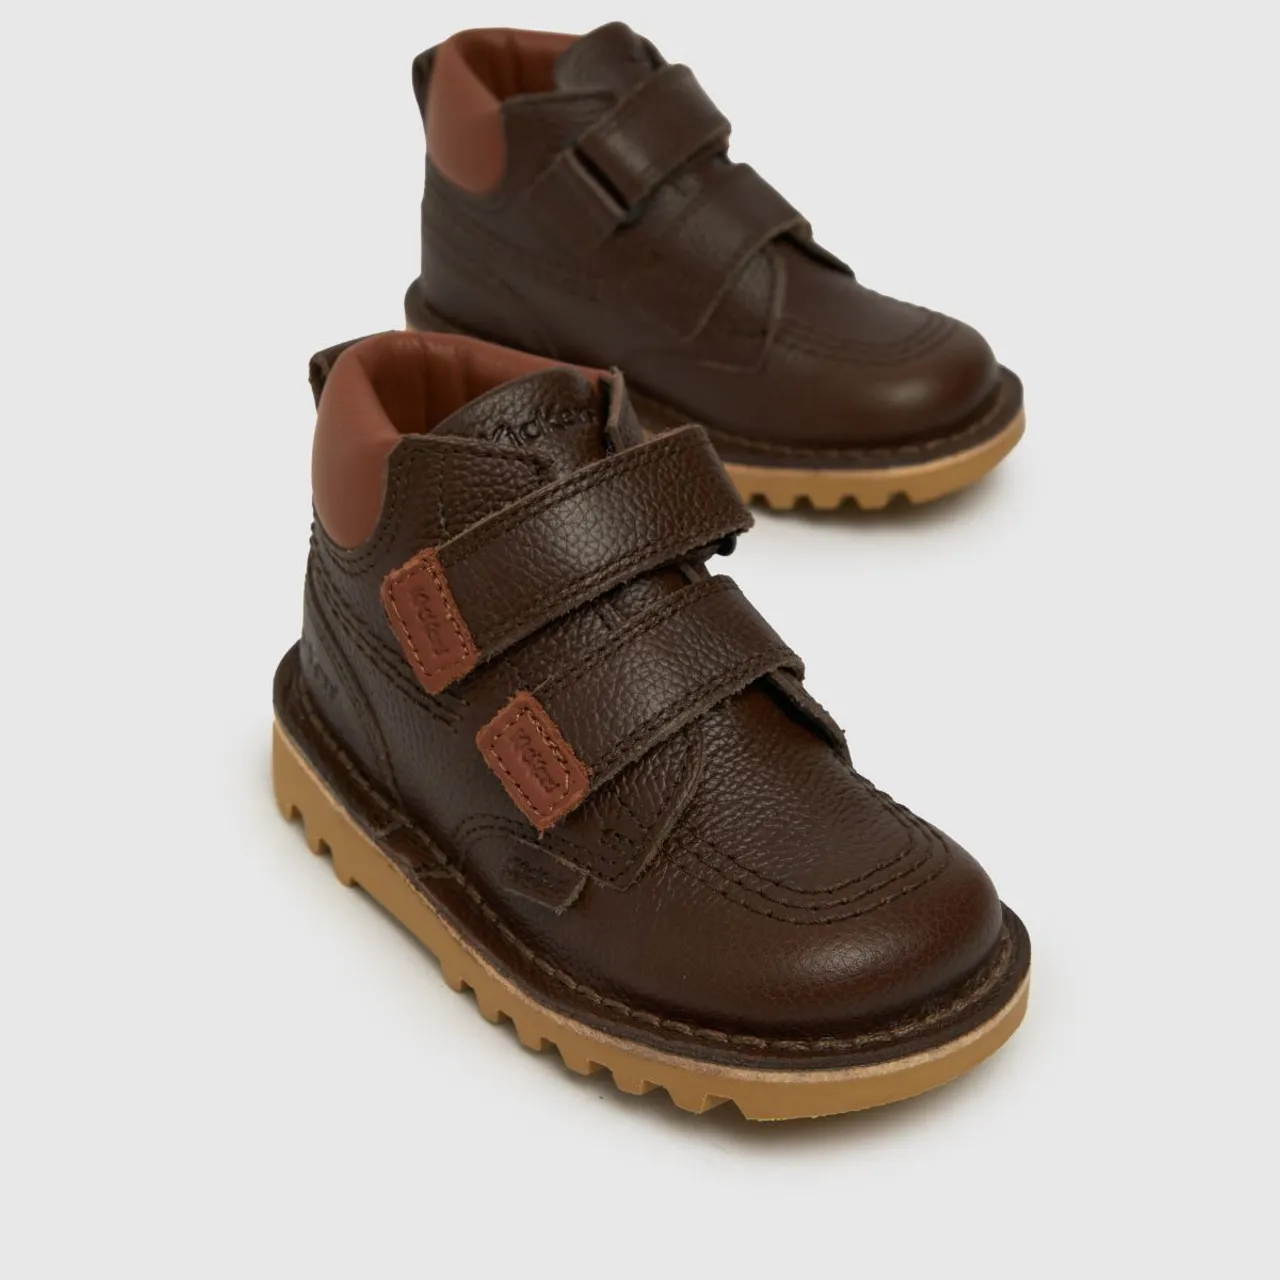 Kickers Brown Hi Roll Boys Toddler Boots